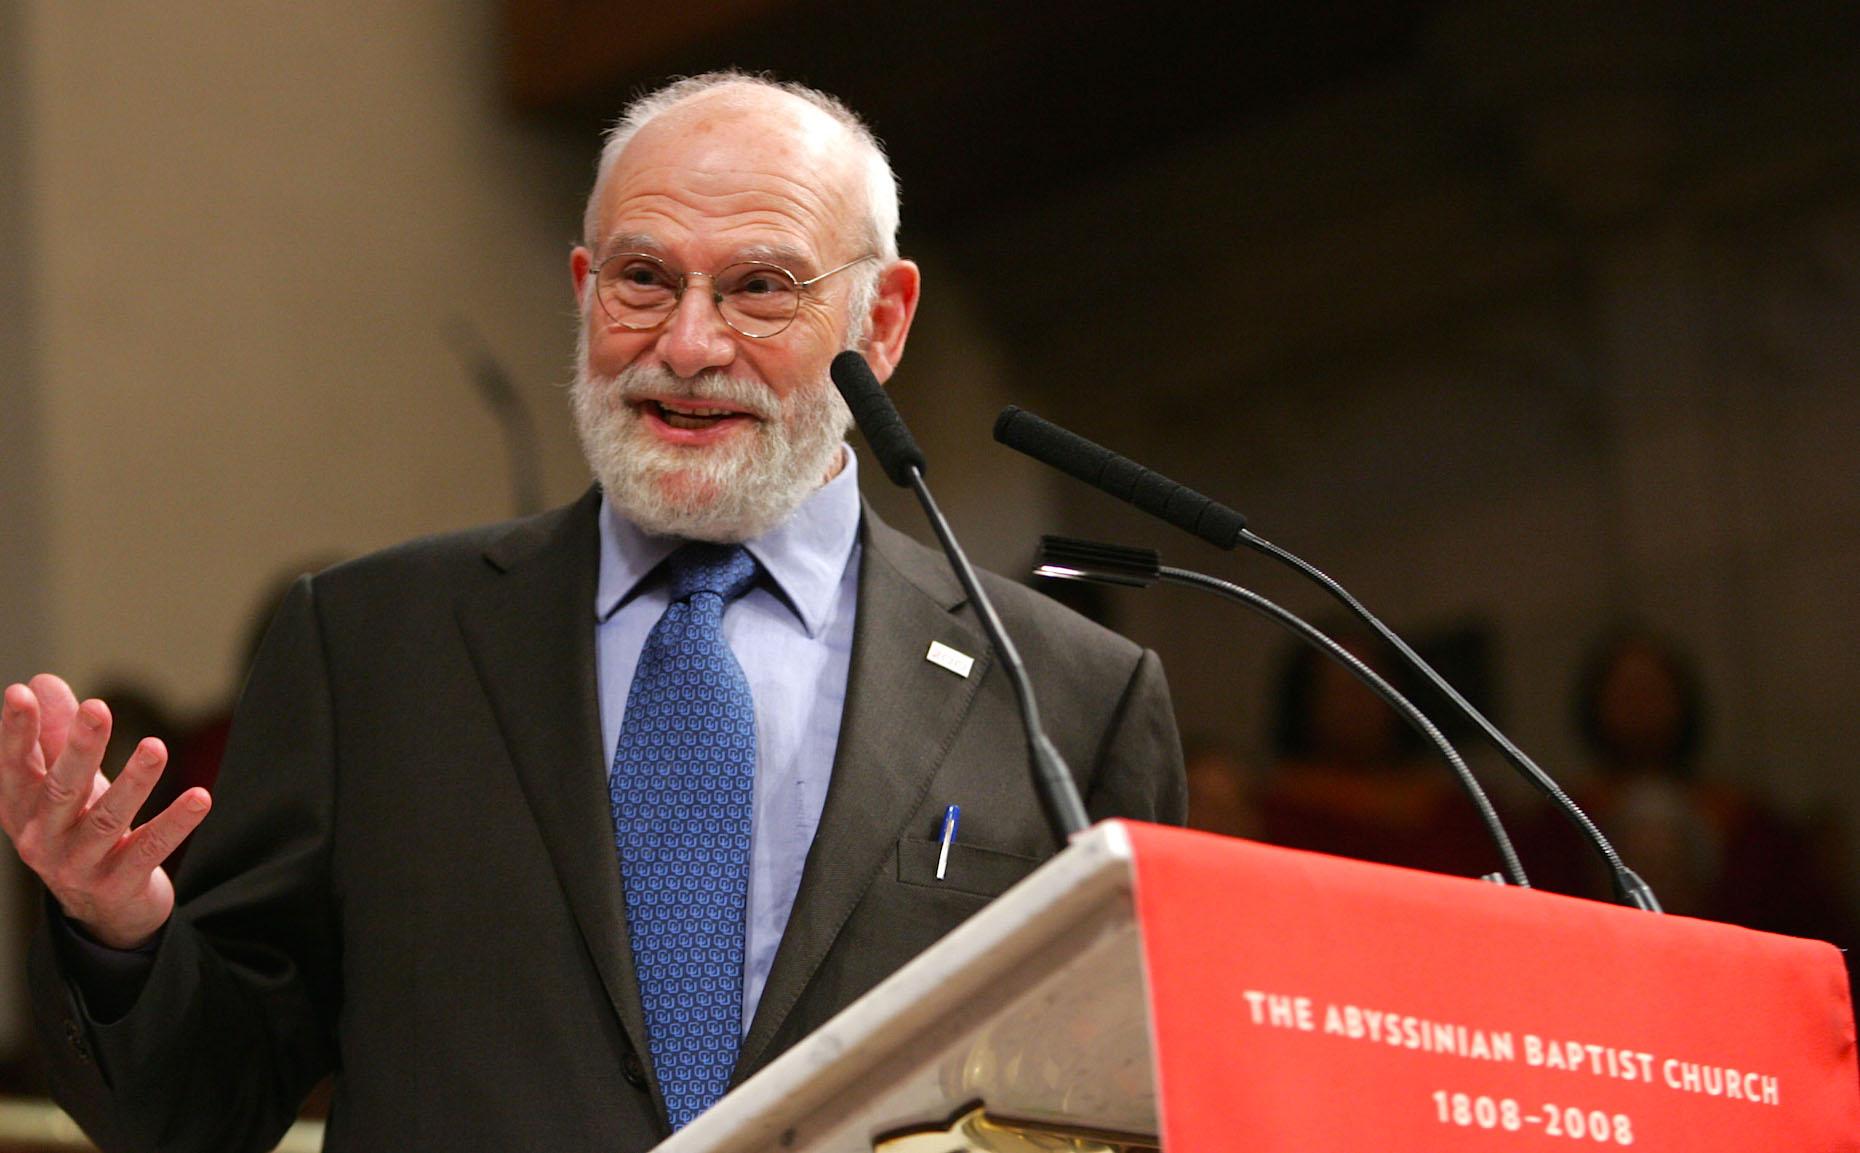 Remembering The Brilliance of Oliver Sacks, The Takeaway